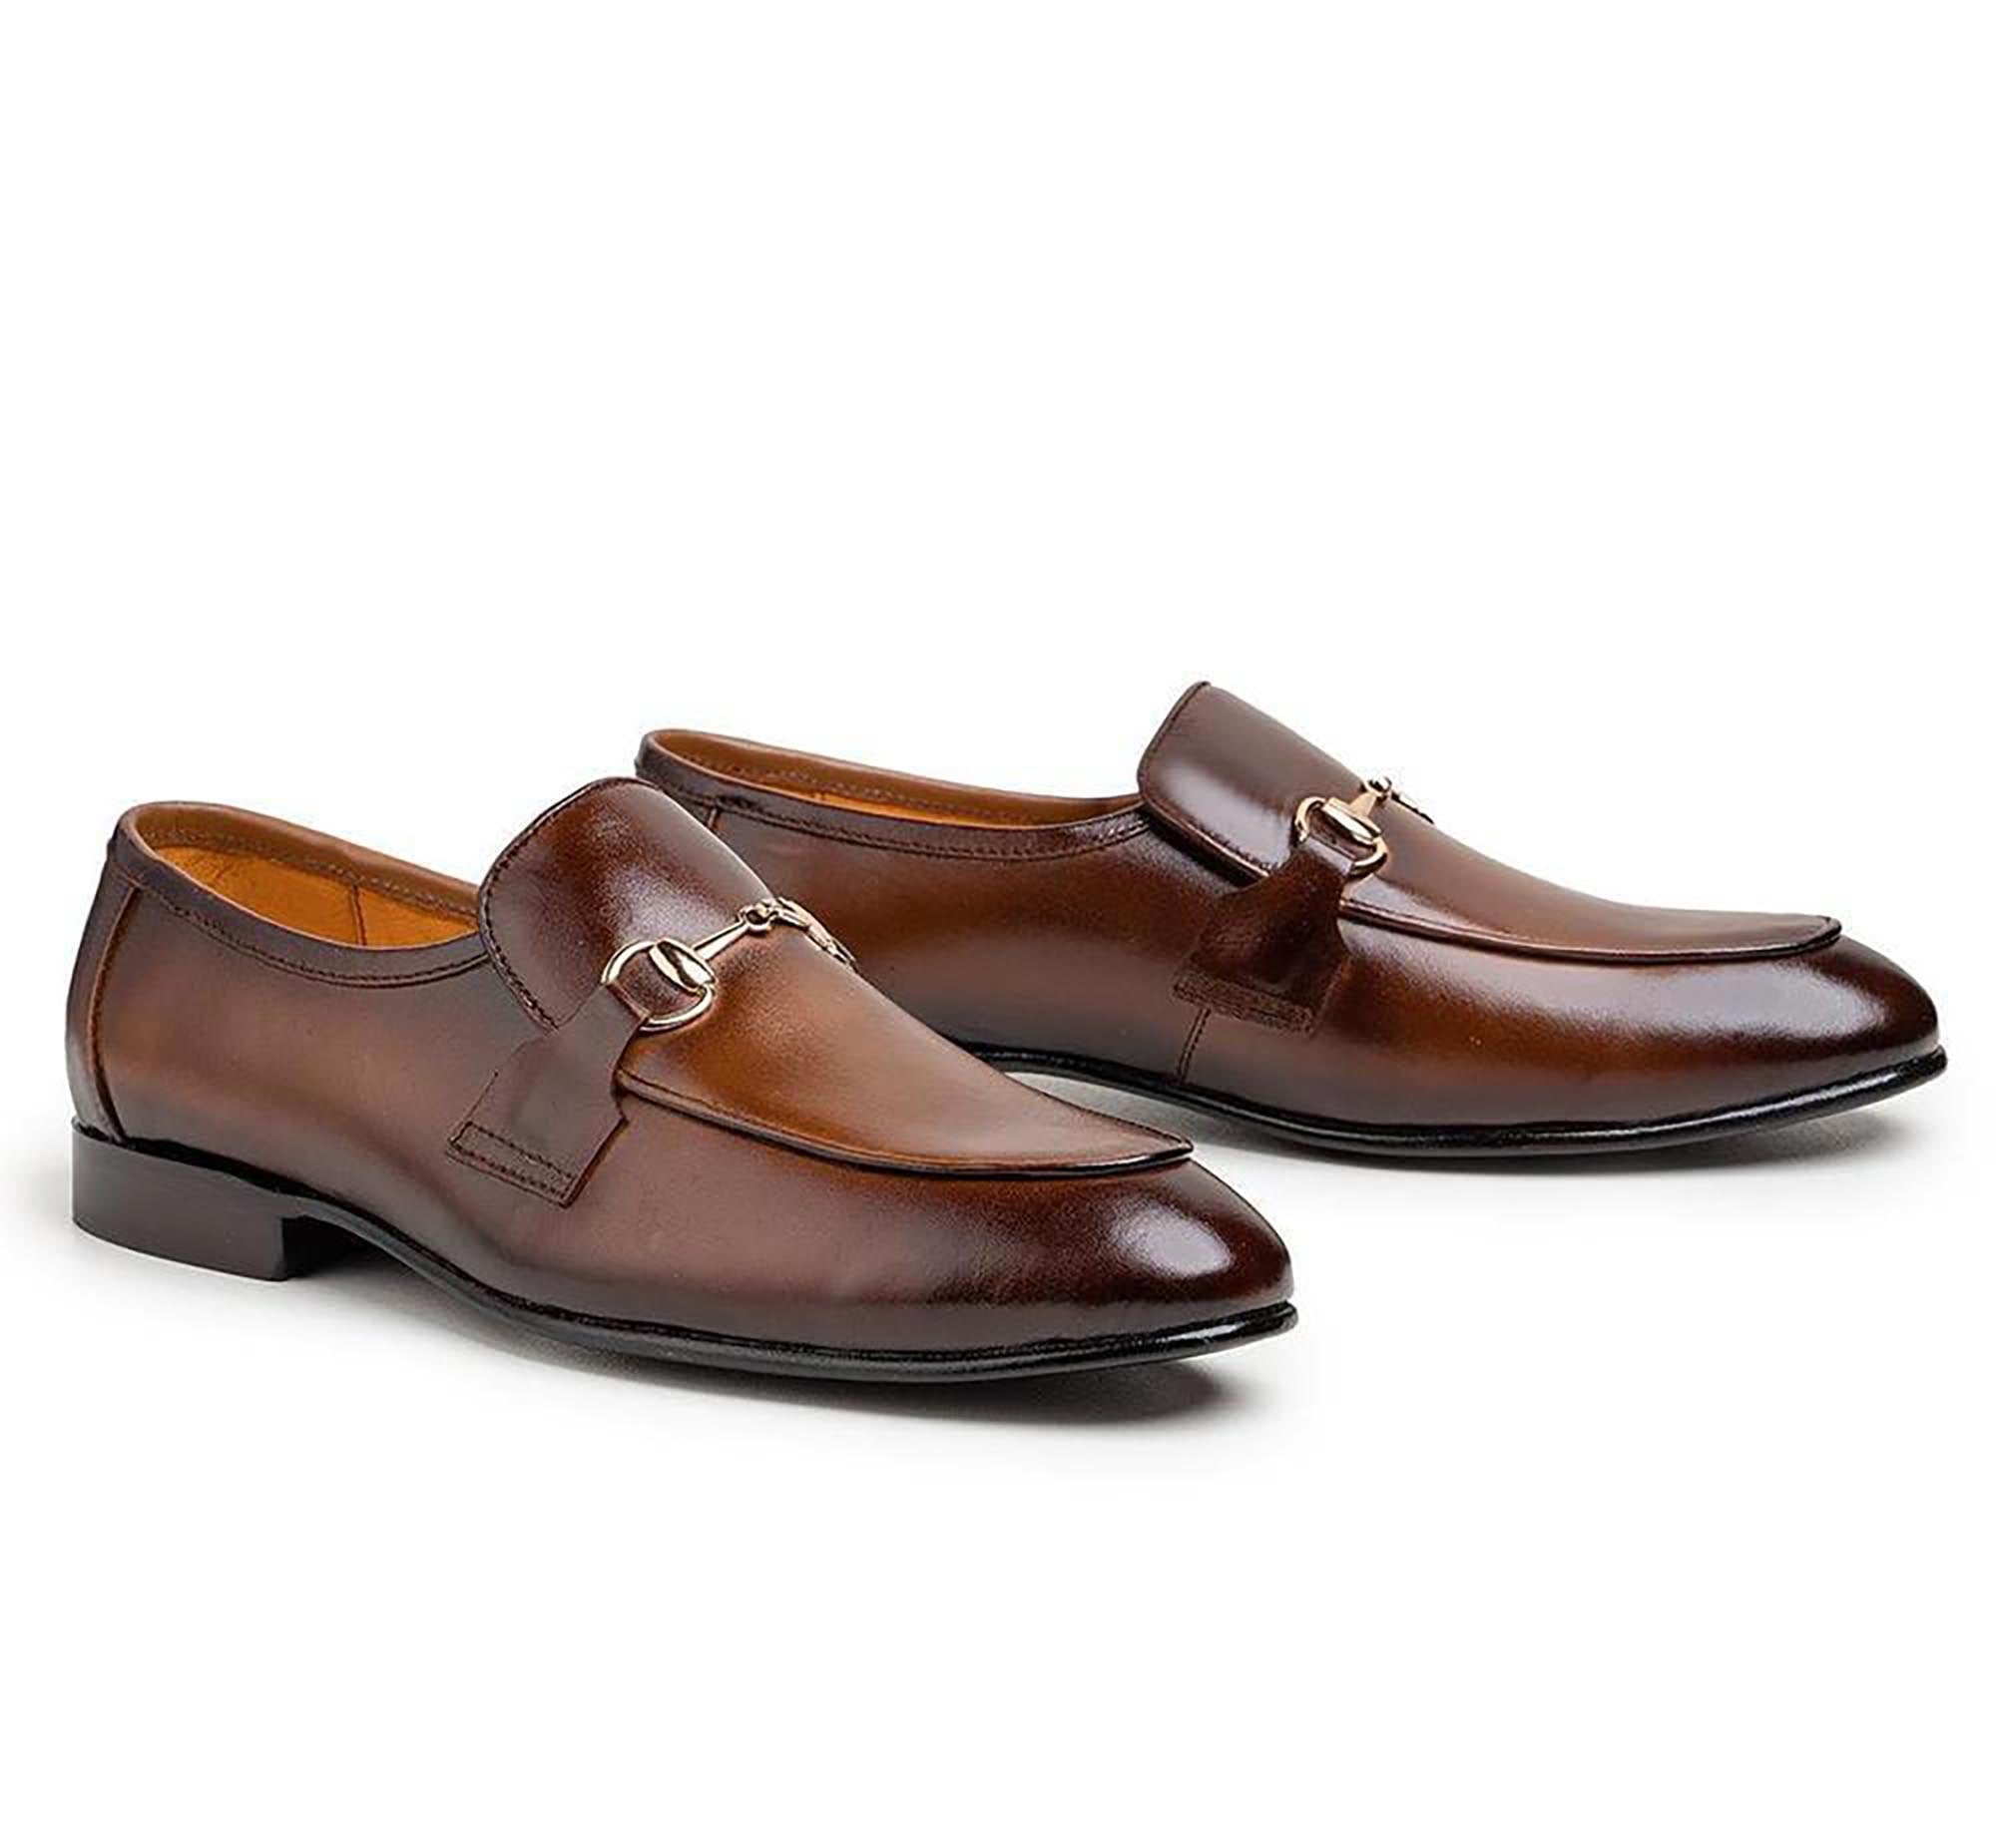 Men's Cavaliere Brown Leather Formal Shoes